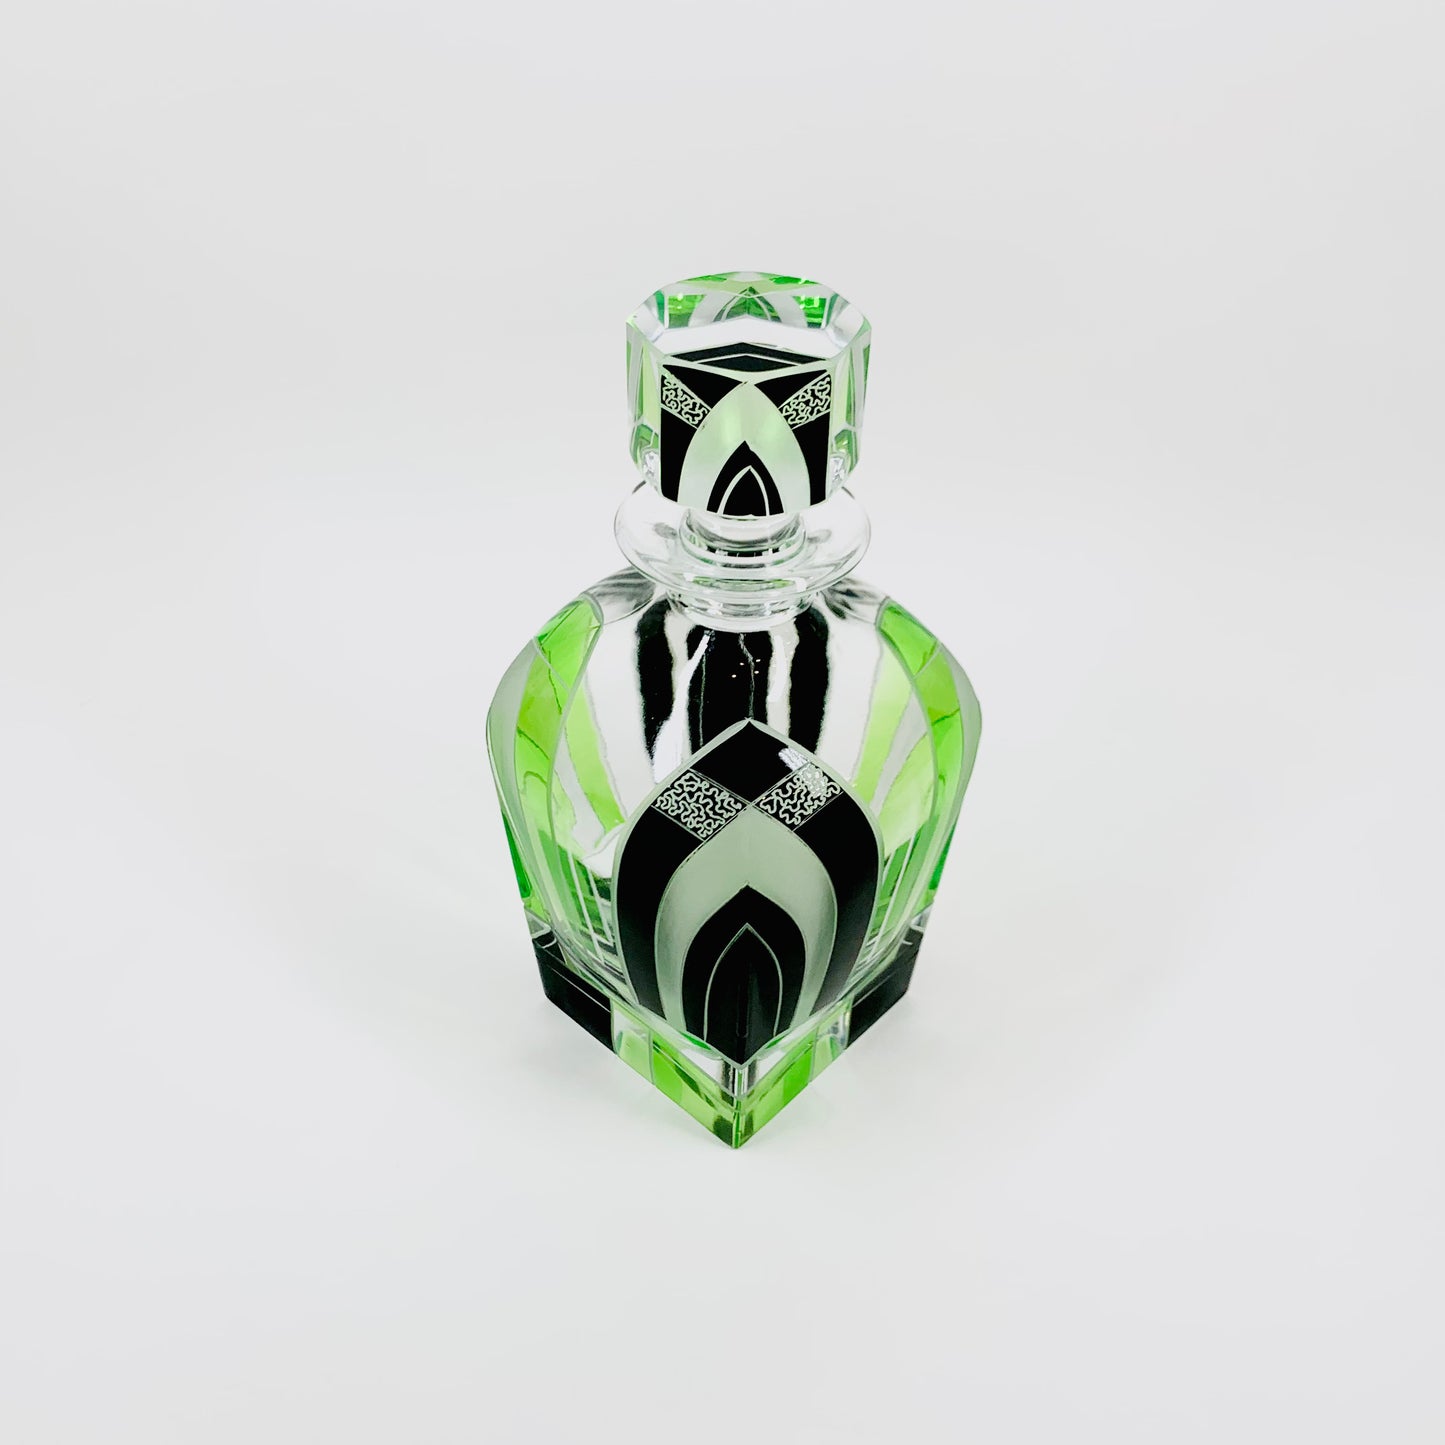 Extremely extremely rare antique Art Deco green & black enamel glass decanter set by Karl Palda